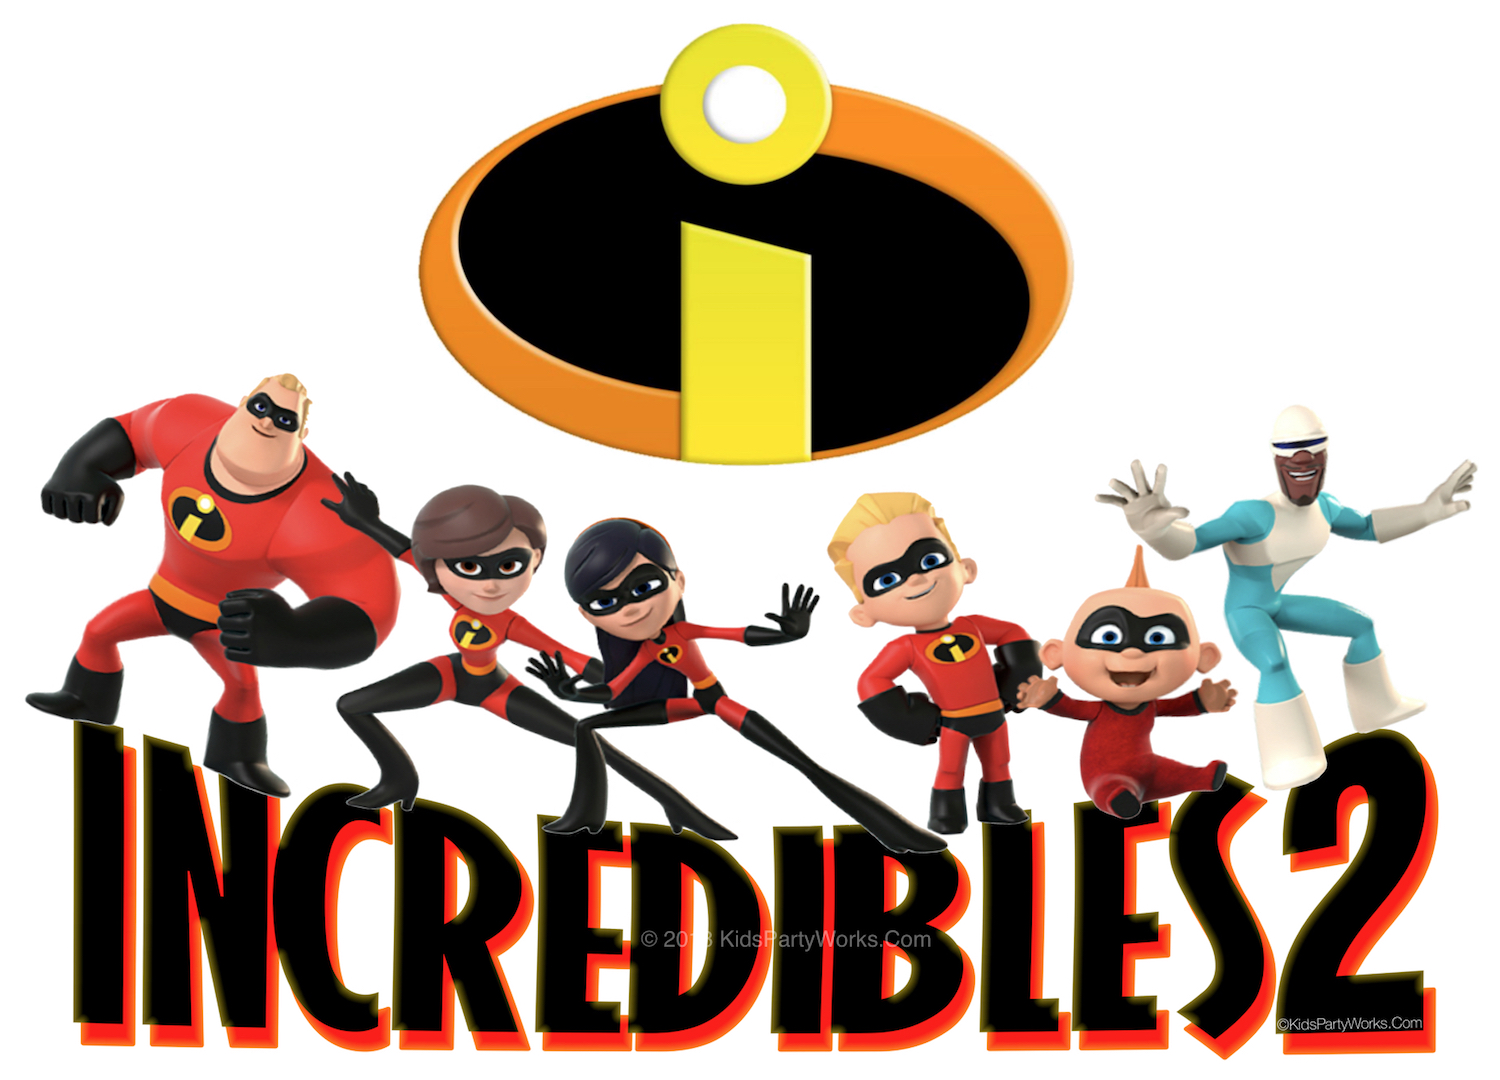 The Incredibles font and Incredibles 2 font are the same but still so much fun. Create cool party printables like Incredibles invitation, Incredibles cake topper, cupcake toppers, bottle labels.